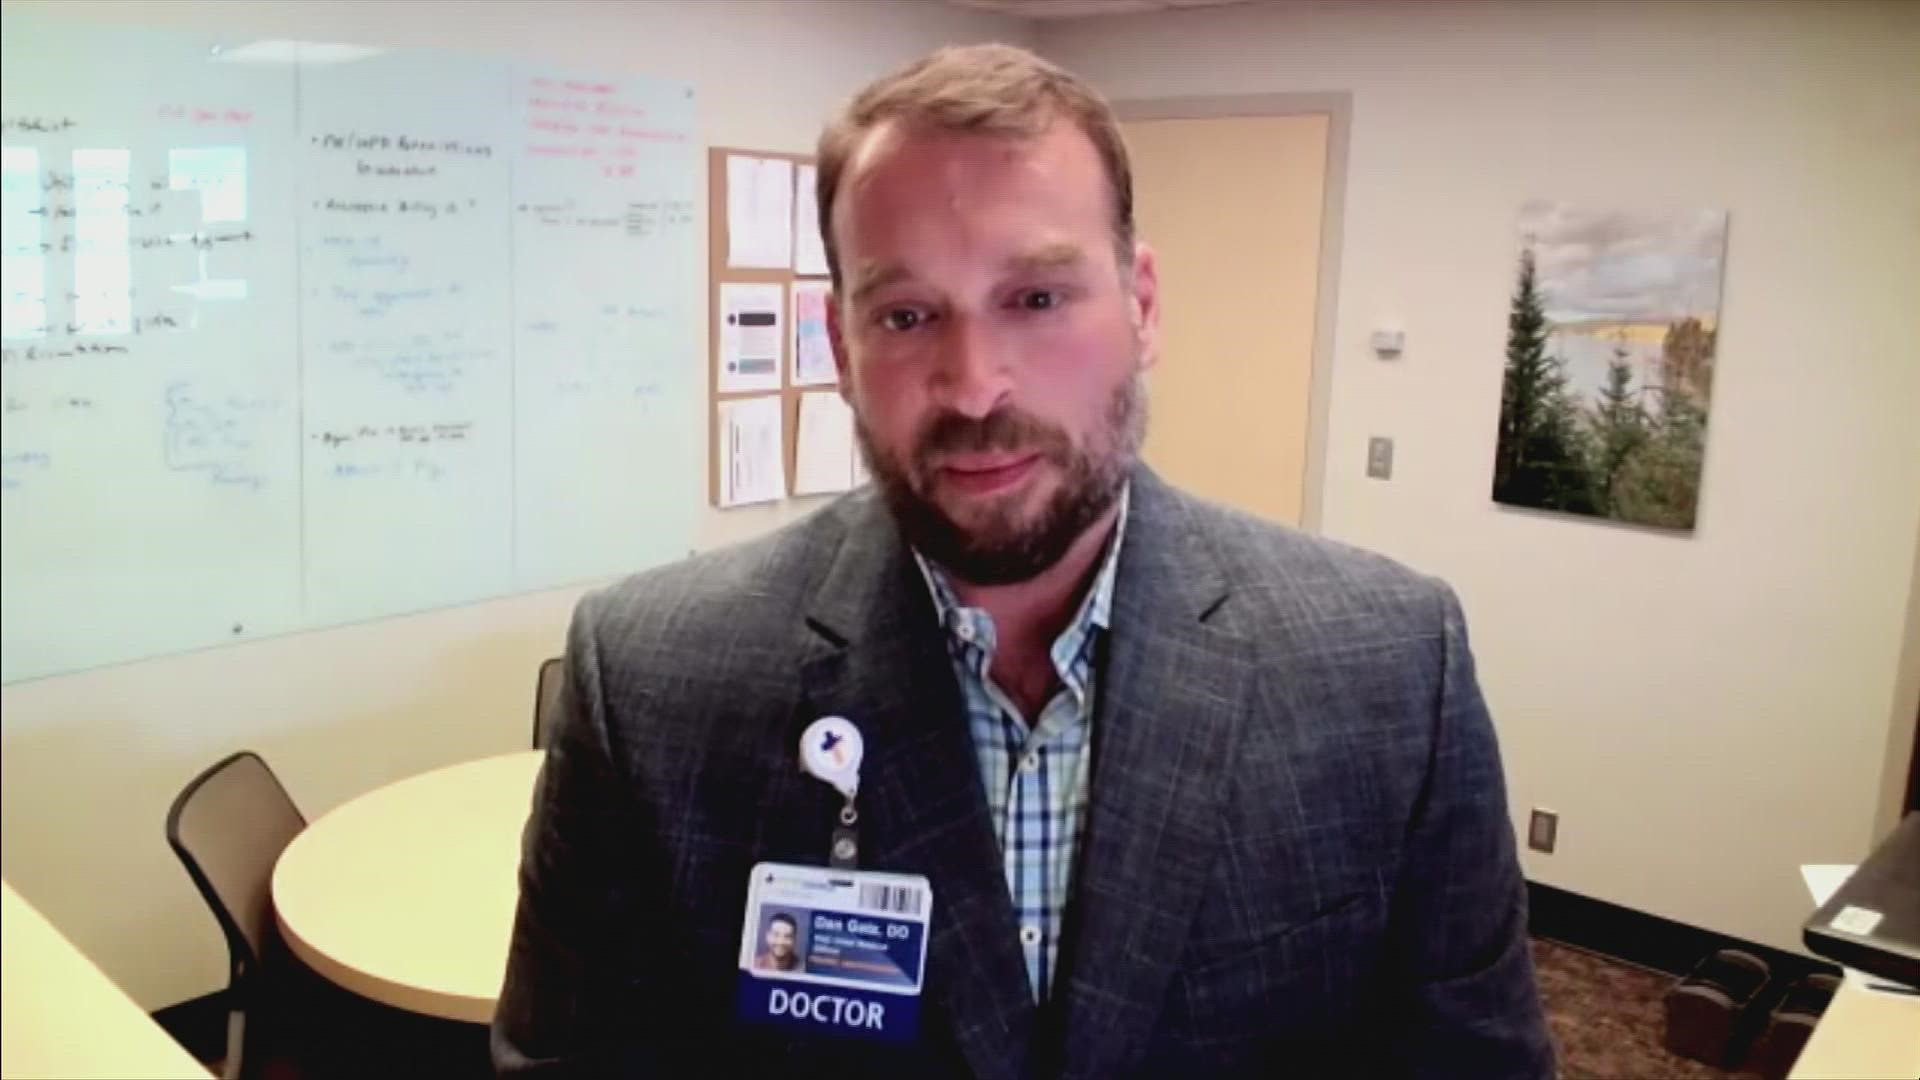 Dr. Daniel Getz, chief medical officer of Providence Sacred Heart Medical Center, is asking all Washingtonians who are eligible to get vaccinated against COVID-19.